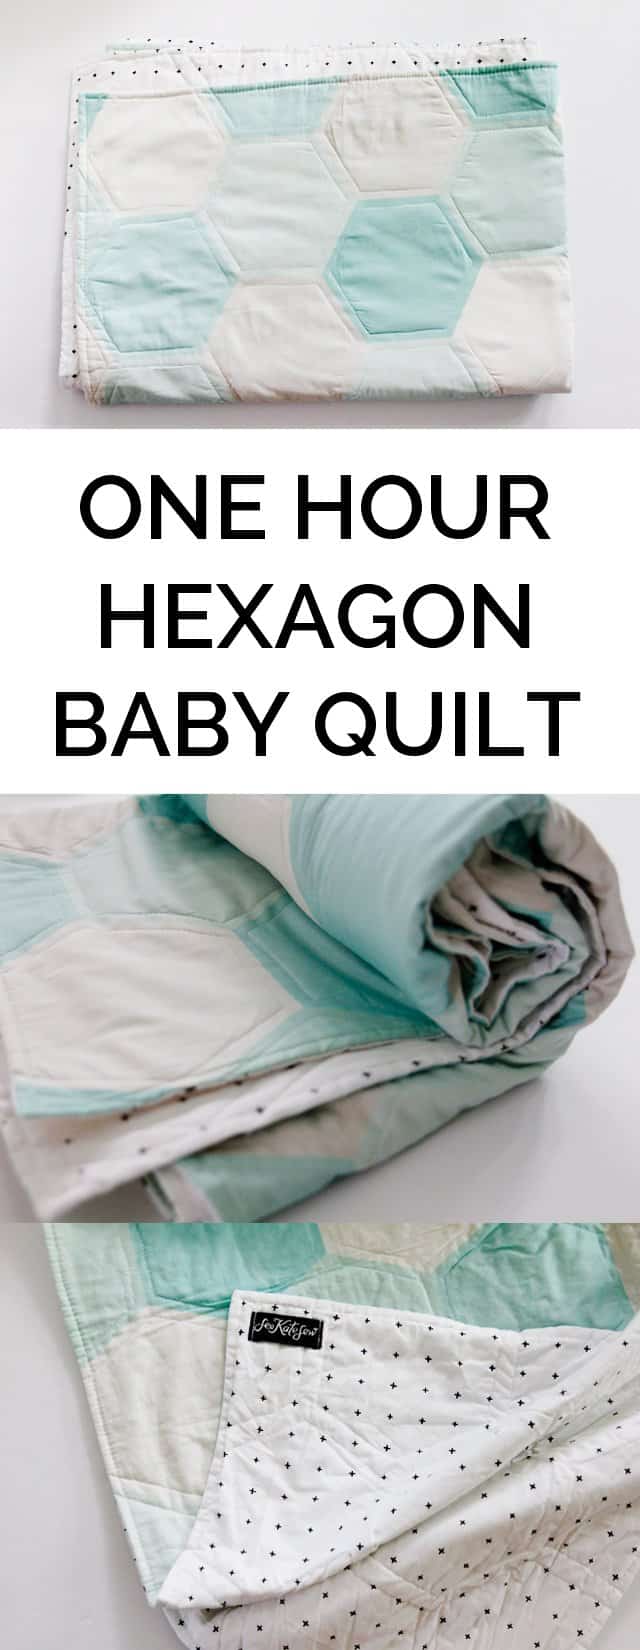 One Hour Hexagon Baby Quilt | diy baby quilt | handmade baby quilt | easy quilt tutorial | sewing for beginners | beginner sewing projects | hand sewn quilt || See Kate Sew #quilting #easyquilt #babyquilts #seekatesew 